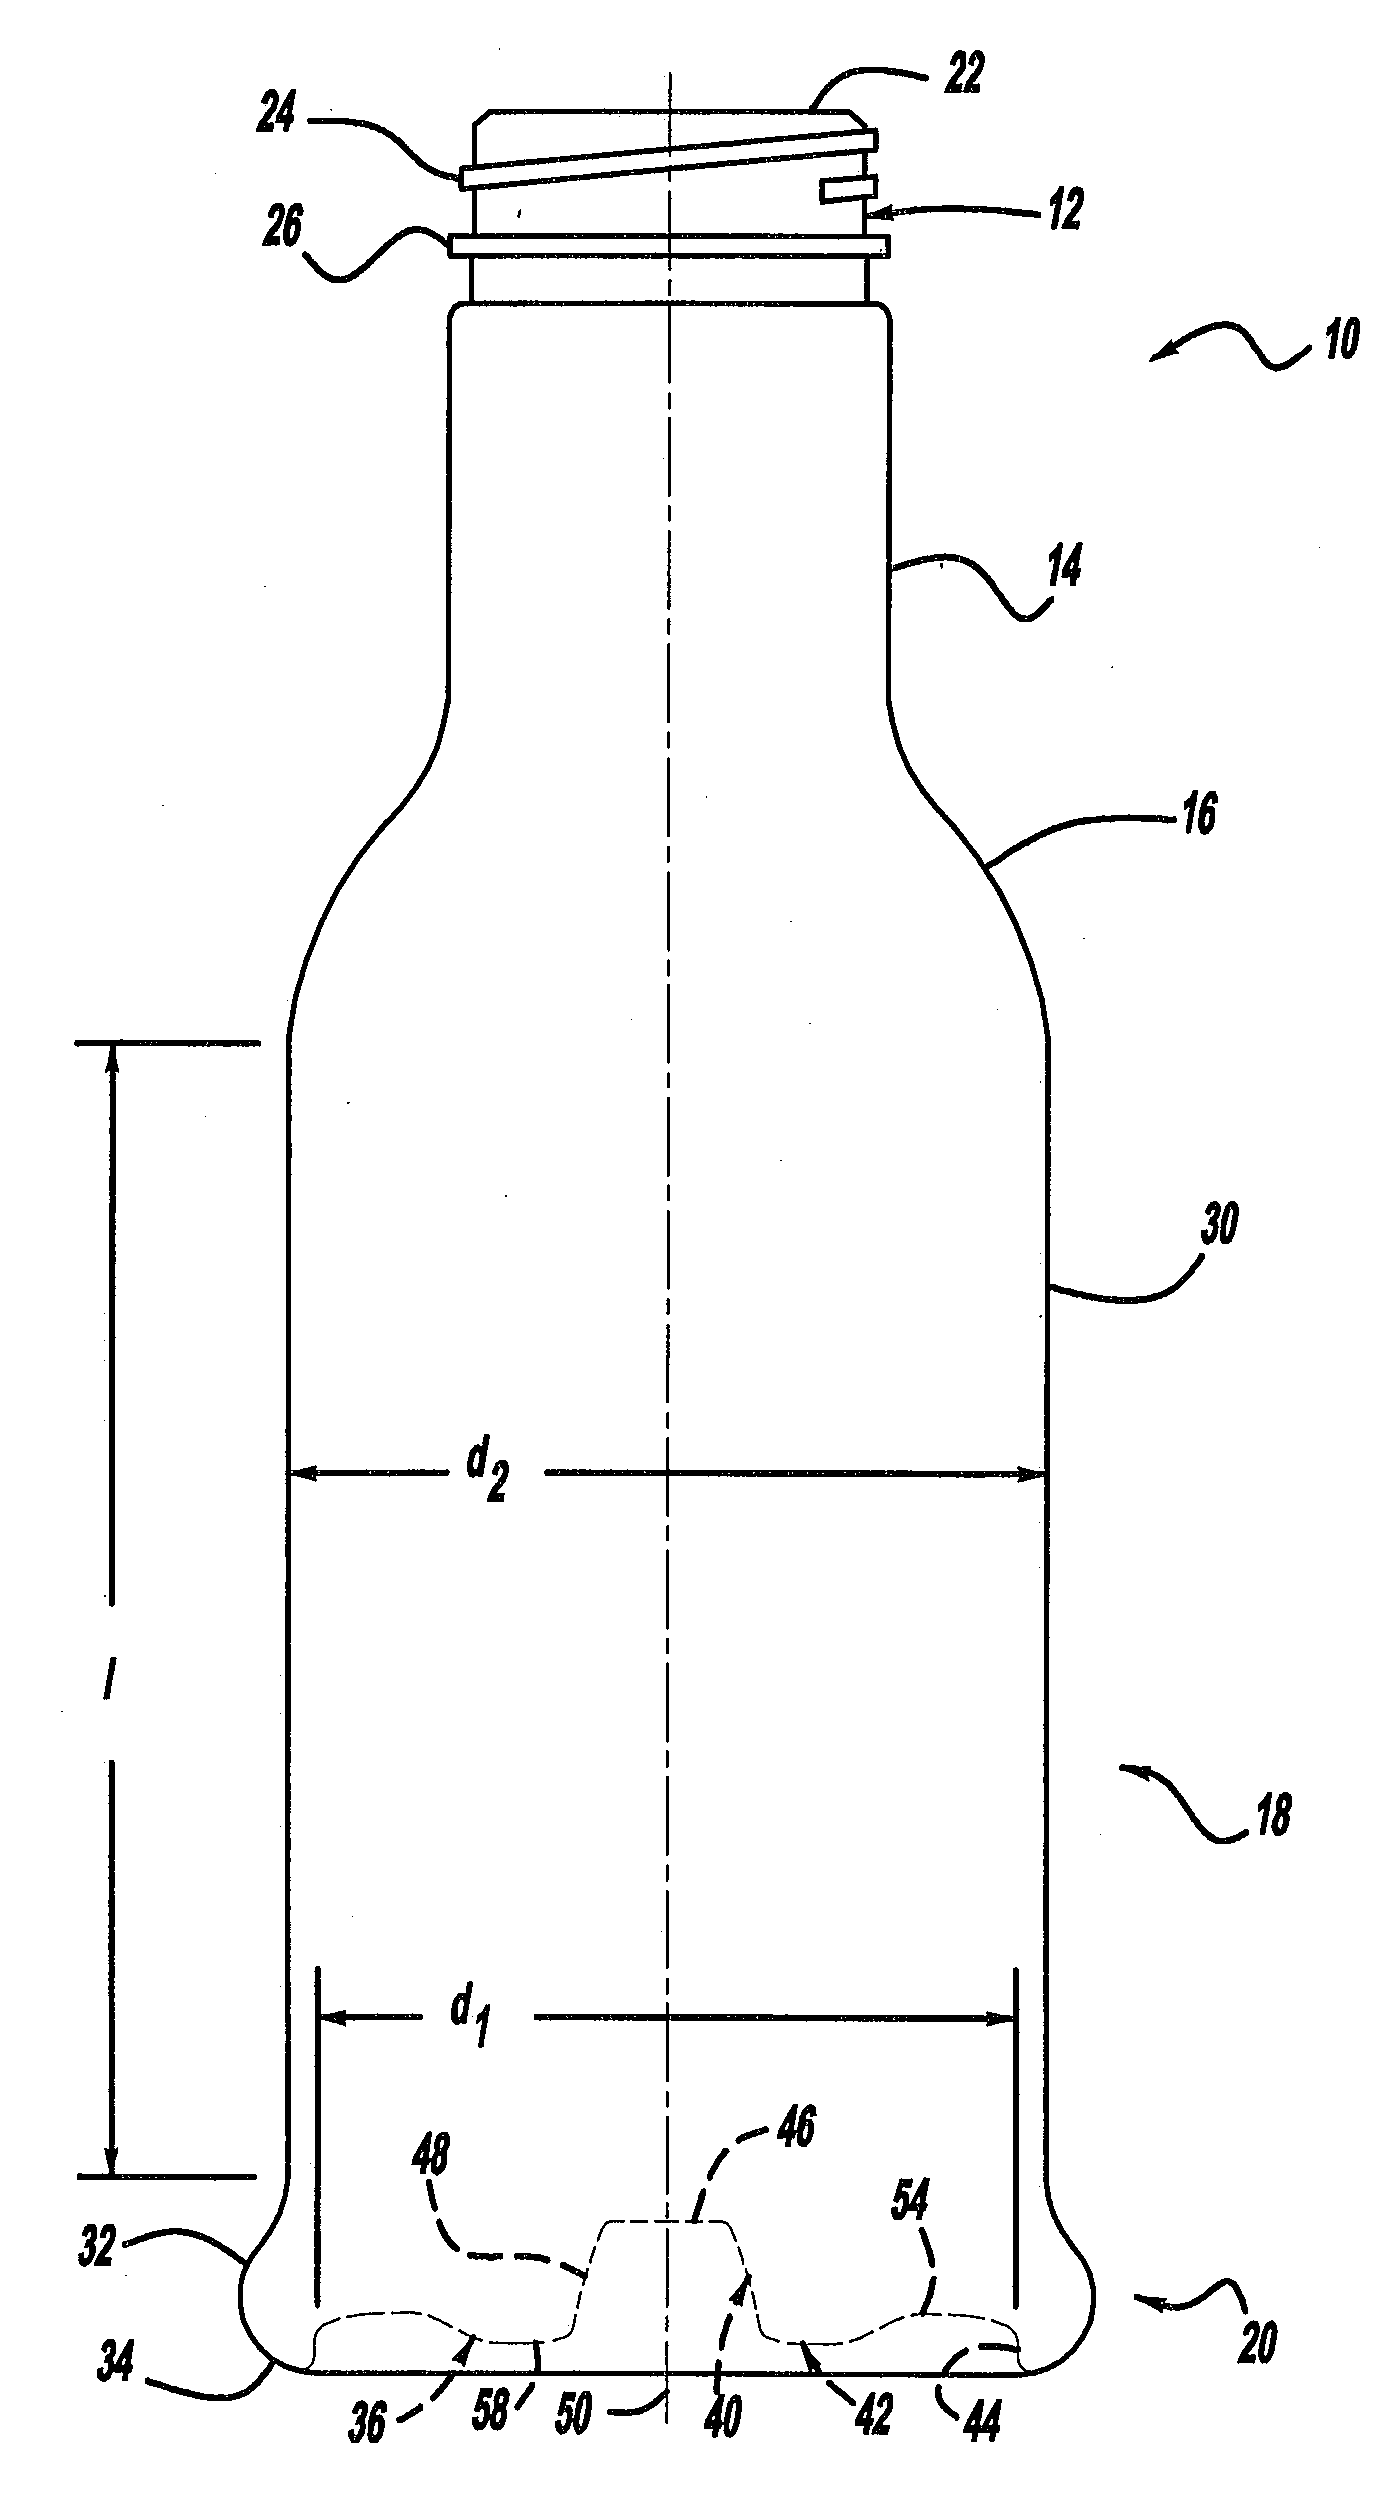 Container base structure responsive to vacuum related forces